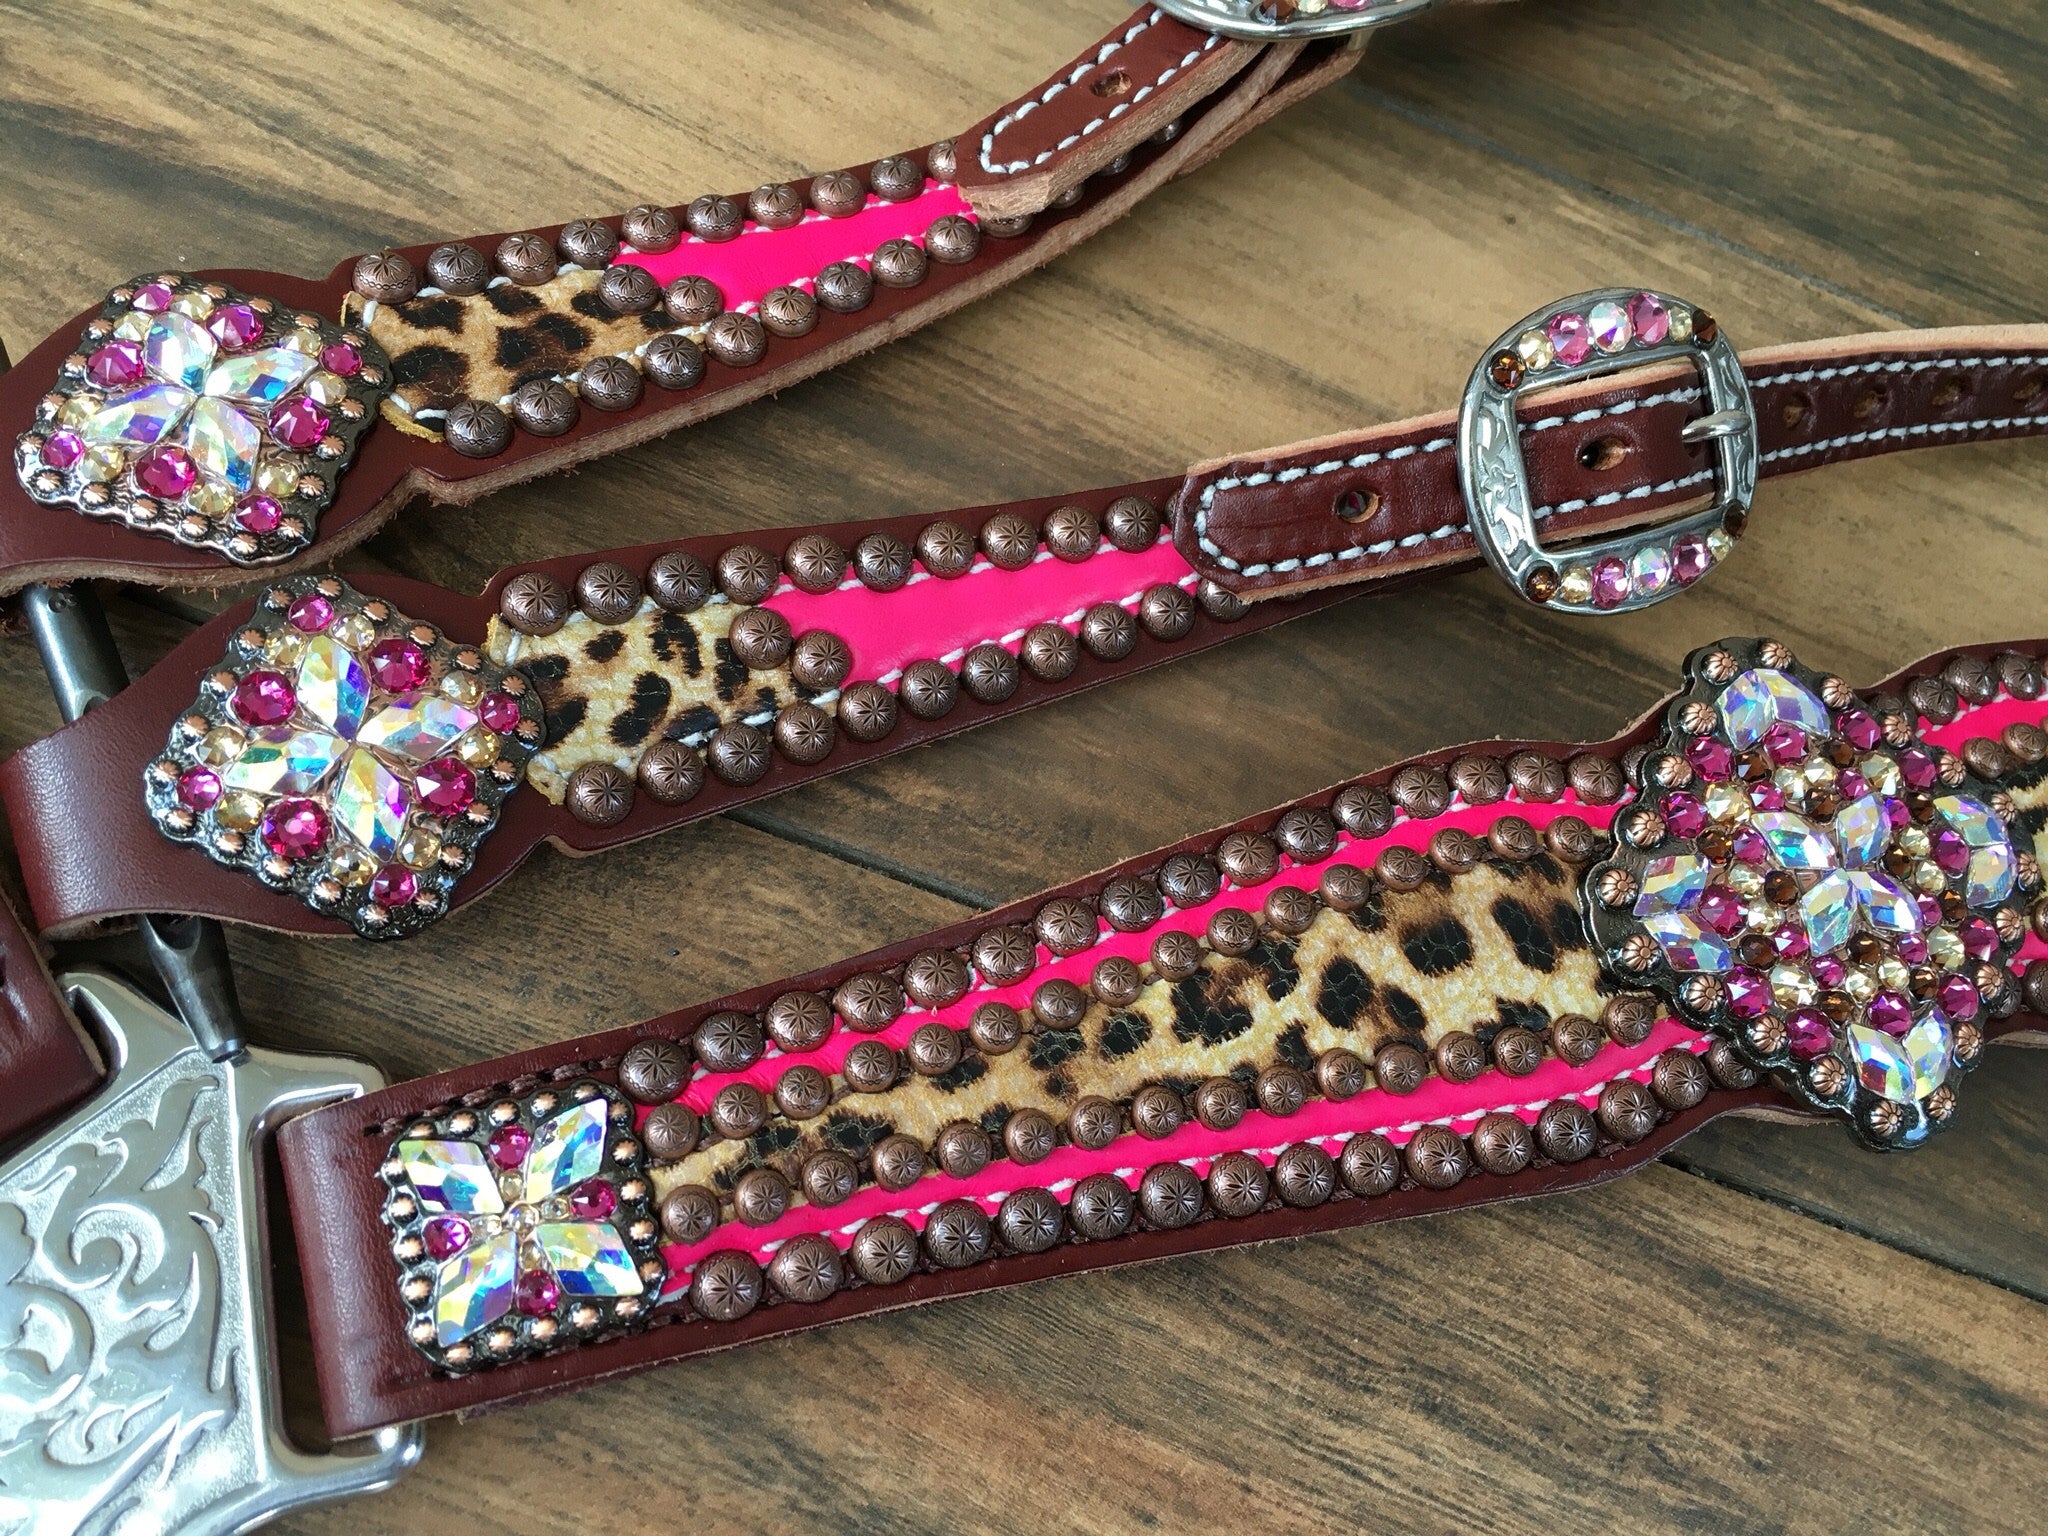 Western Brown Leather Tack set of Headstall & Breast collar with LV  Inlay